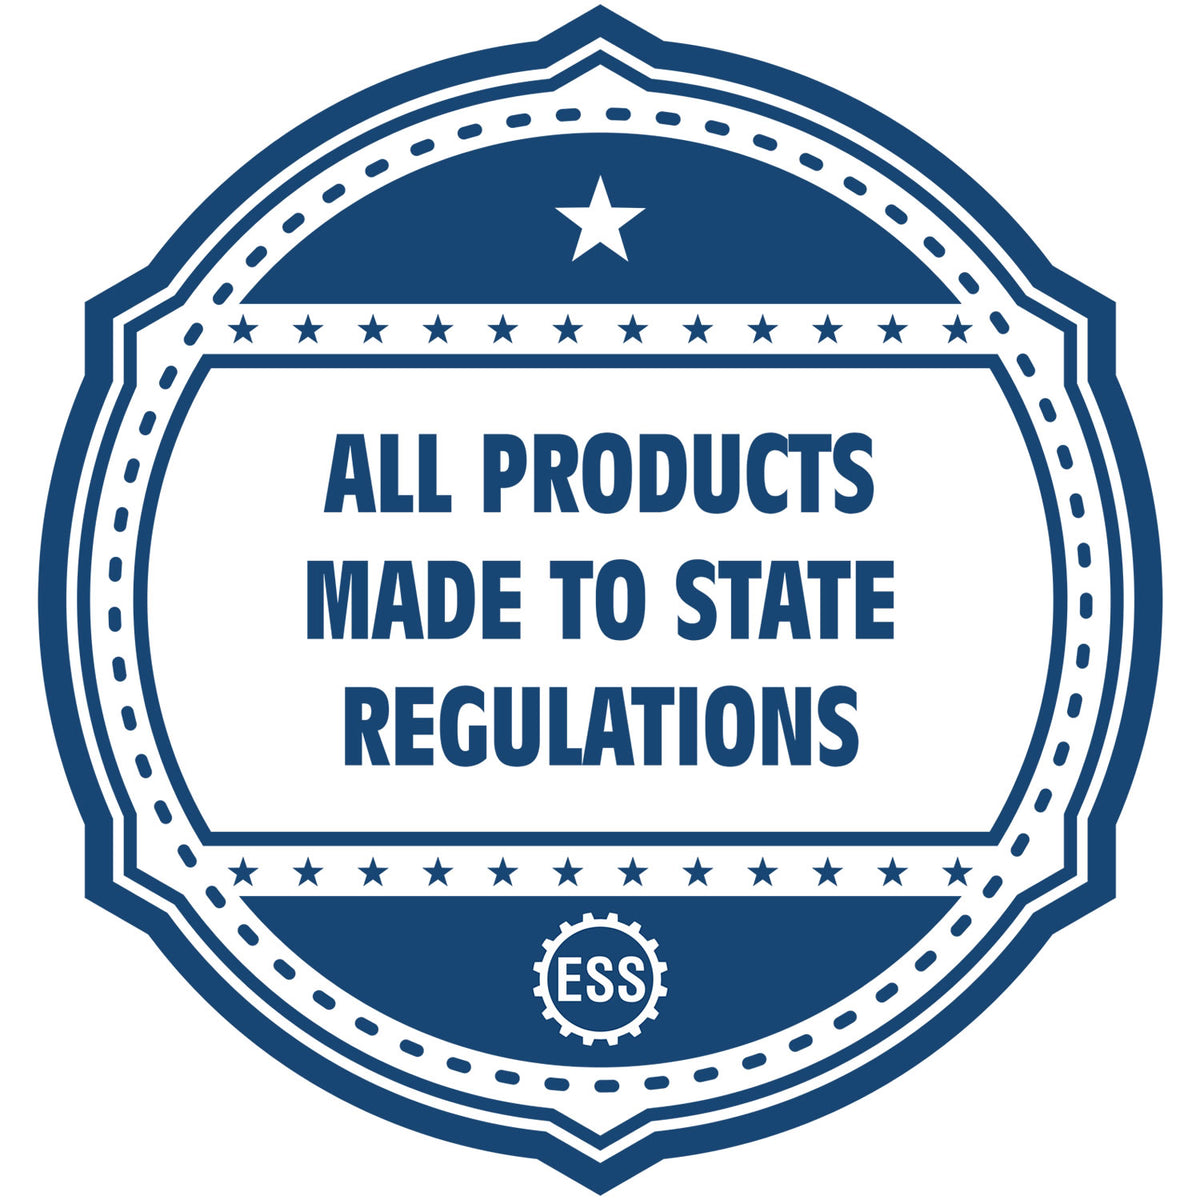 An icon or badge element for the Heavy Duty Cast Iron Michigan Architect Embosser showing that this product is made in compliance with state regulations.